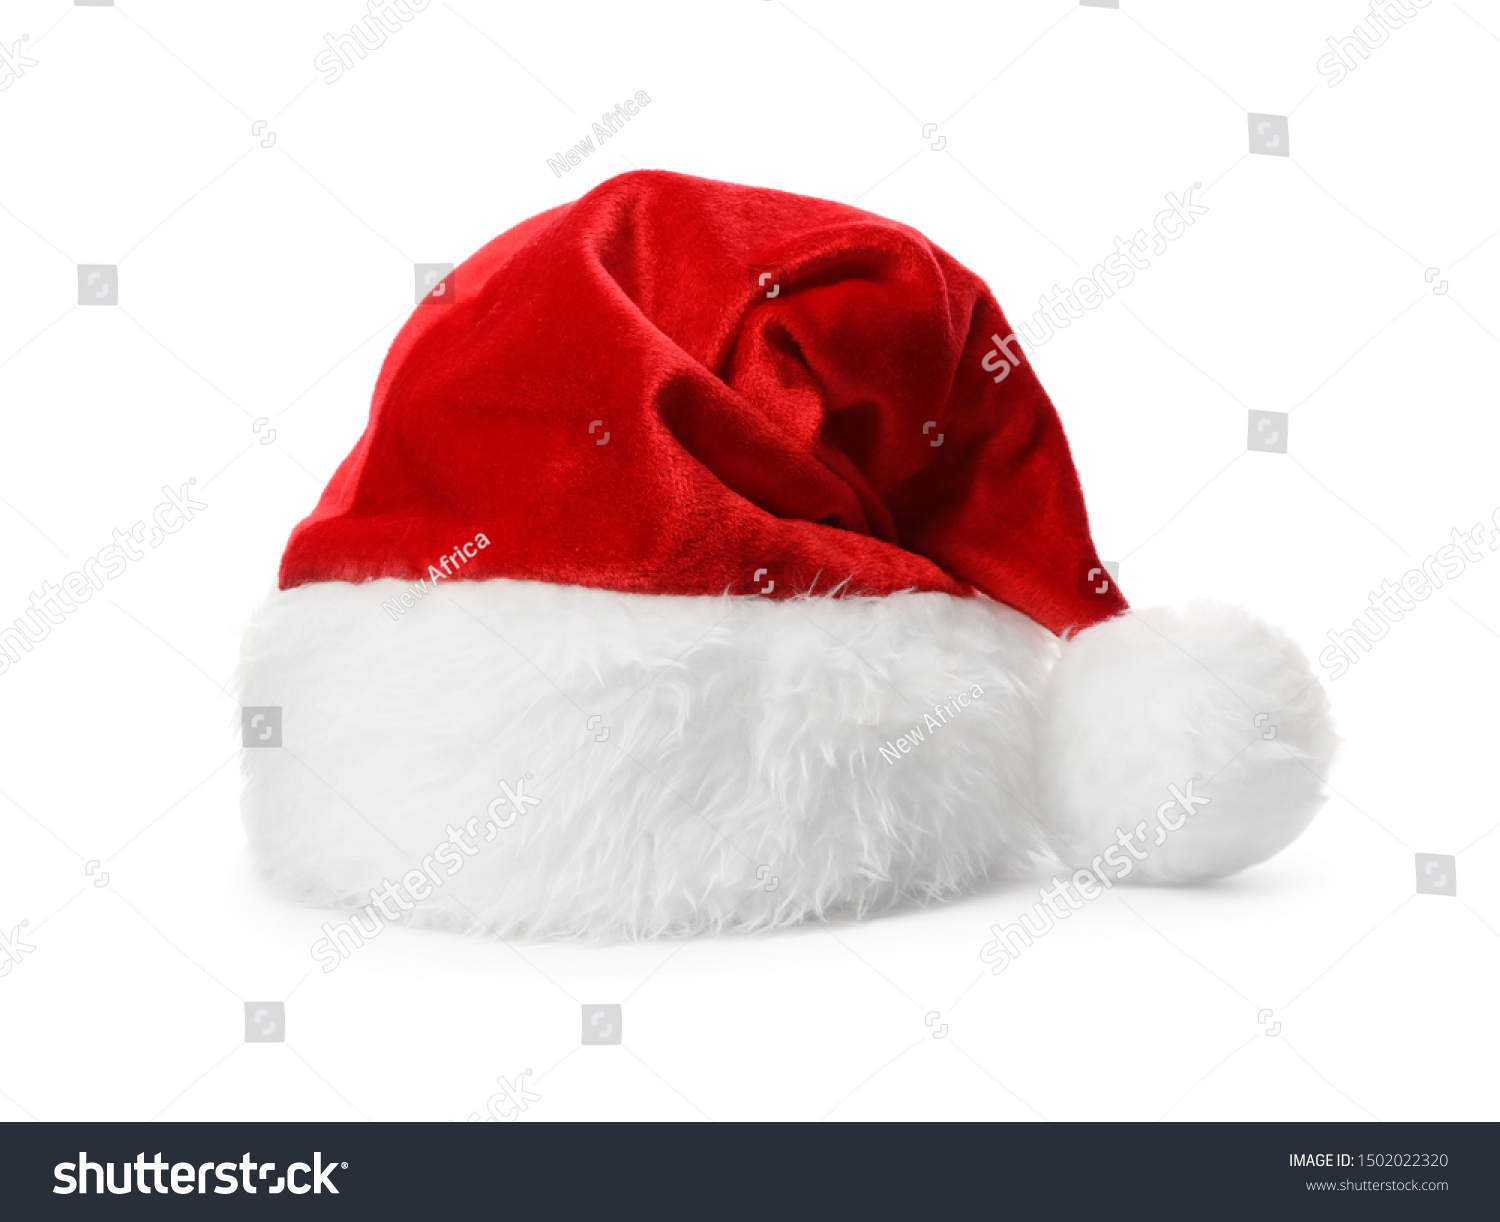 Santa Claus red hat isolated on white #1502022320